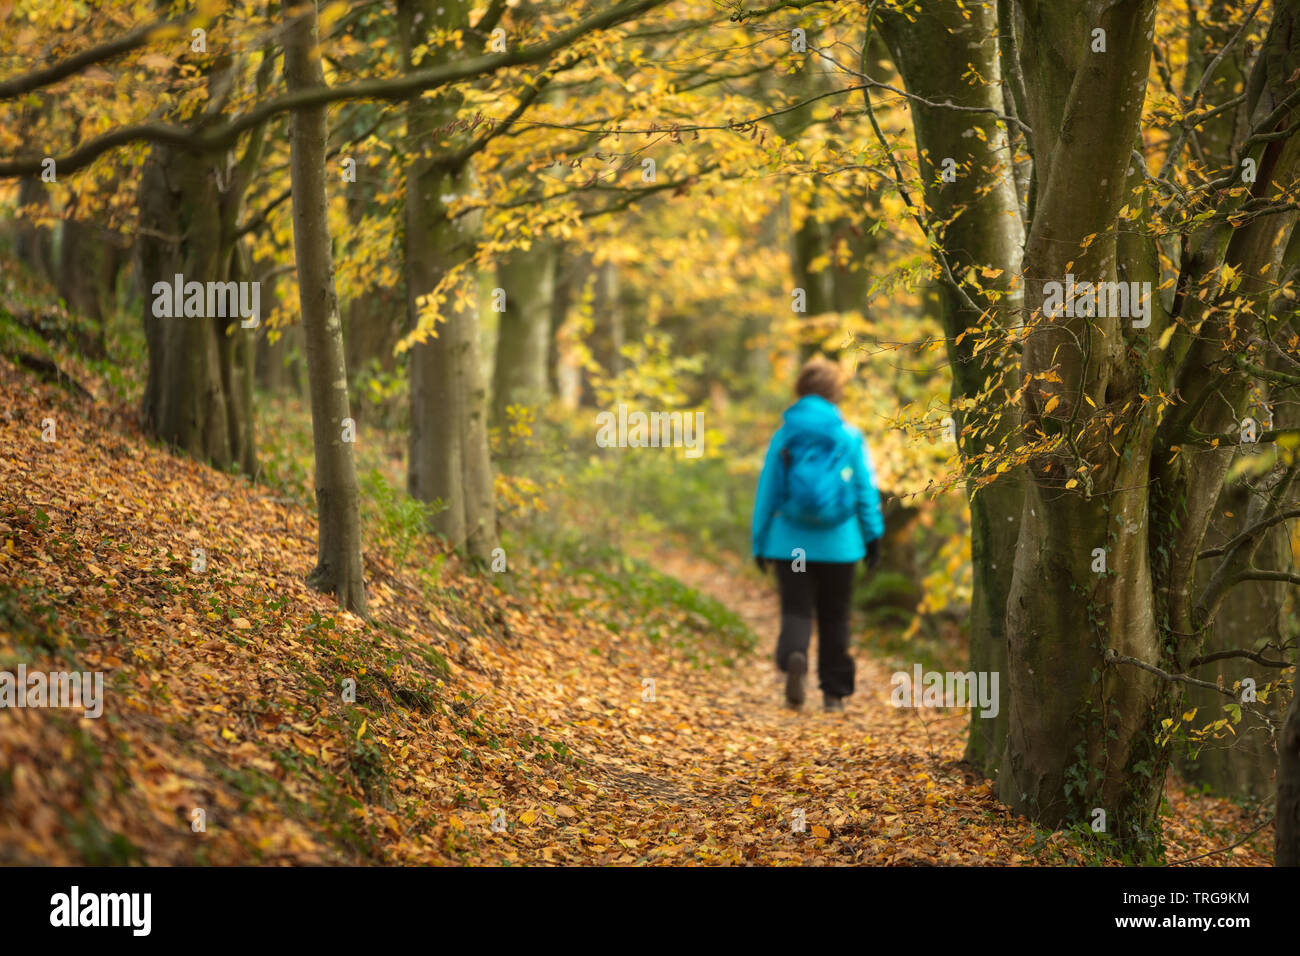 A walker in autumnal Holway Woods near Sandford Orcas, Dorset, England Stock Photo